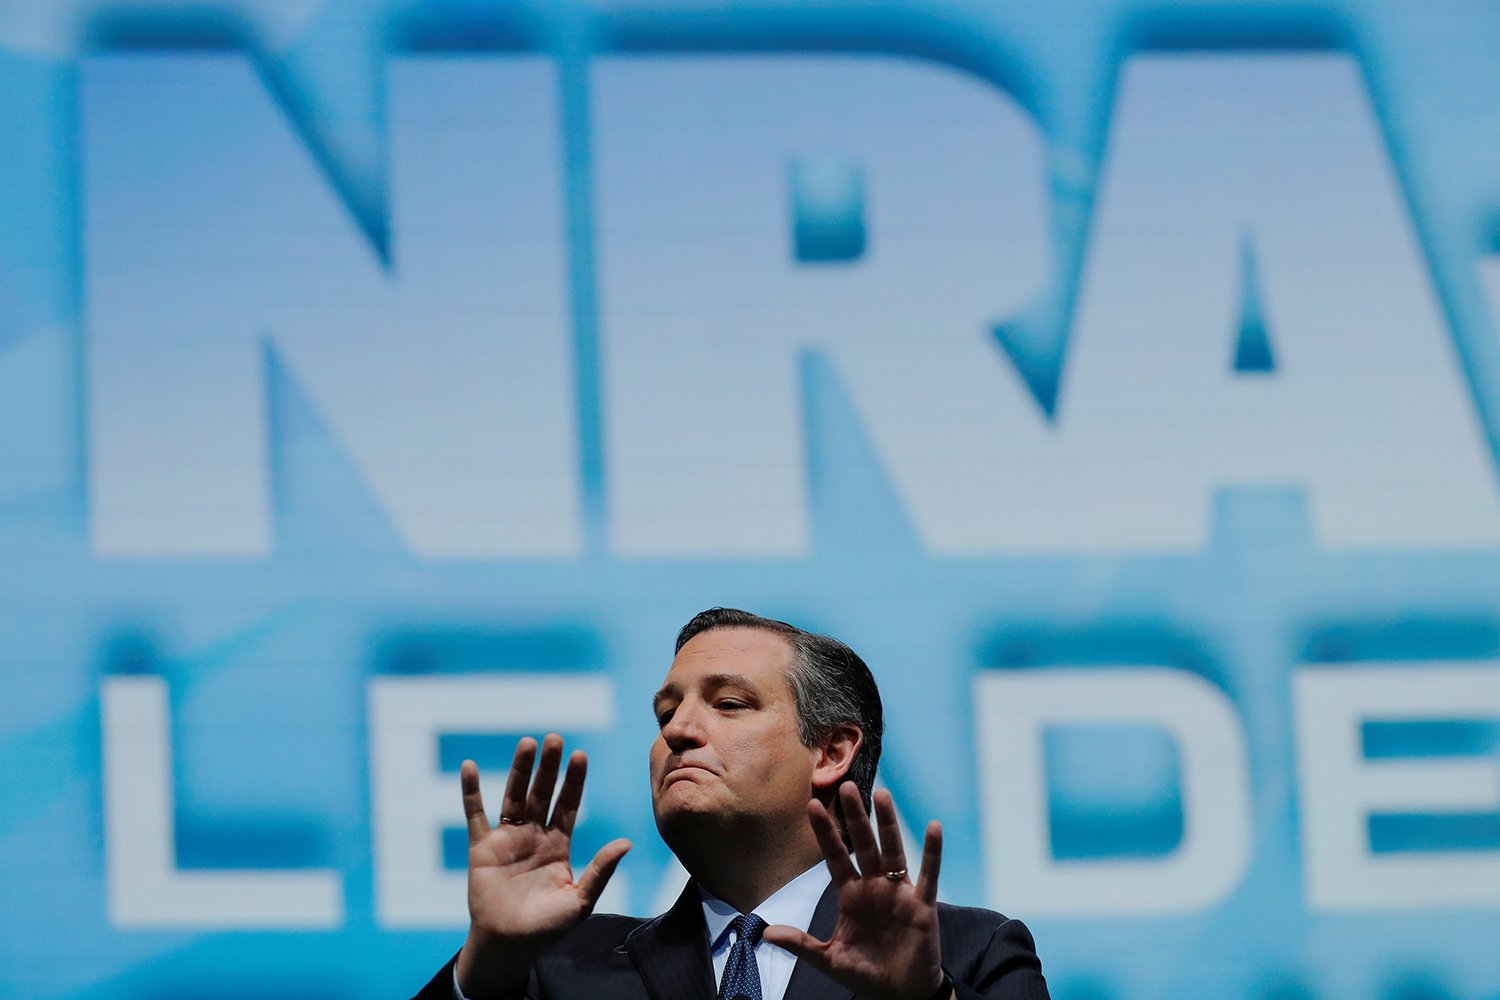 U.S. Sen. Ted Cruz speaks at the annual National Rifle Association convention in Dallas on Friday, May 4, 2018.